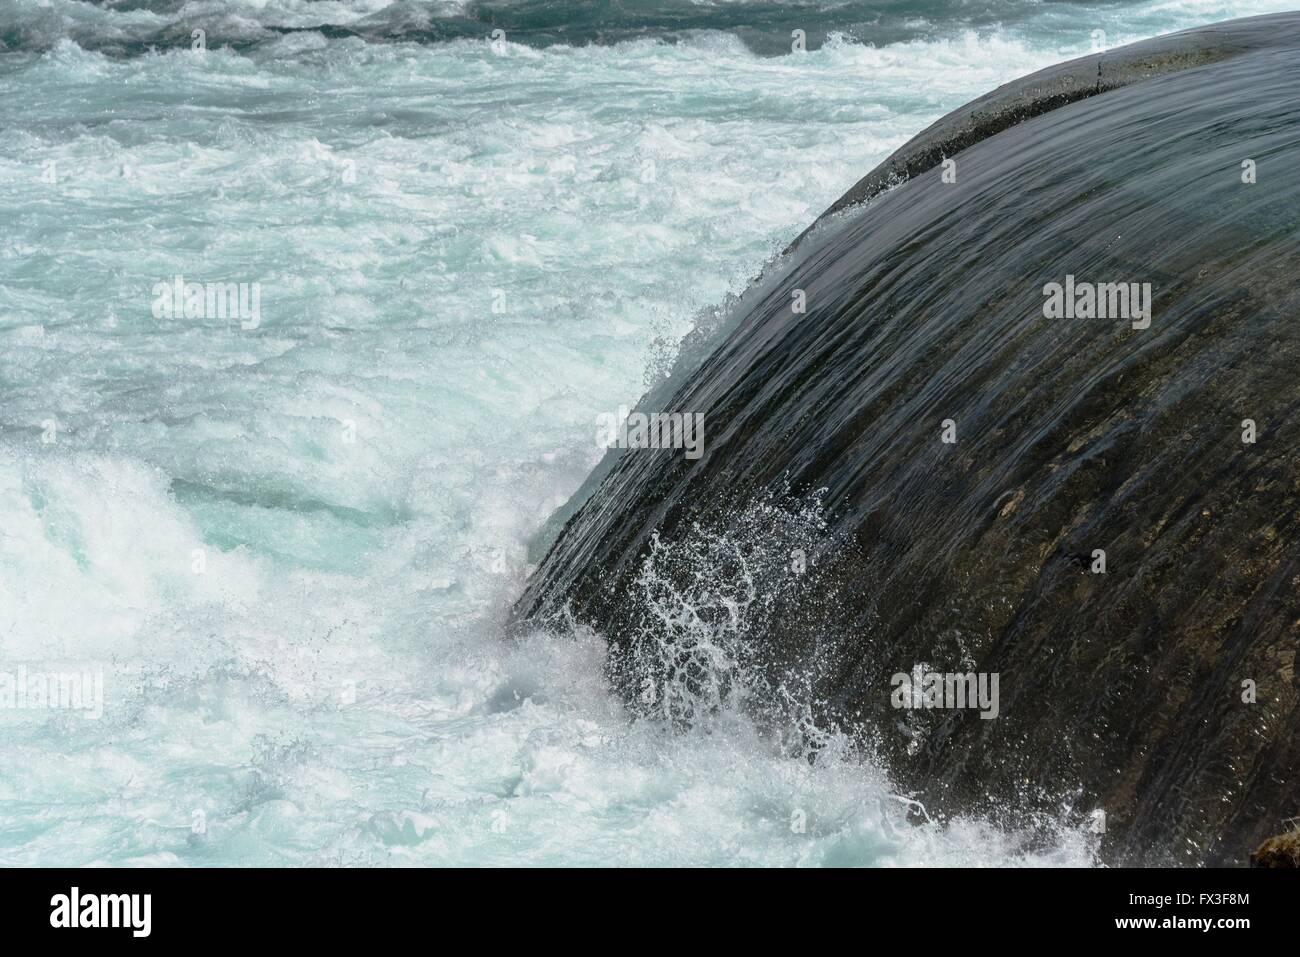 Springtime swift flowing water from man made canal ports along the Niagara River rapids. Stock Photo